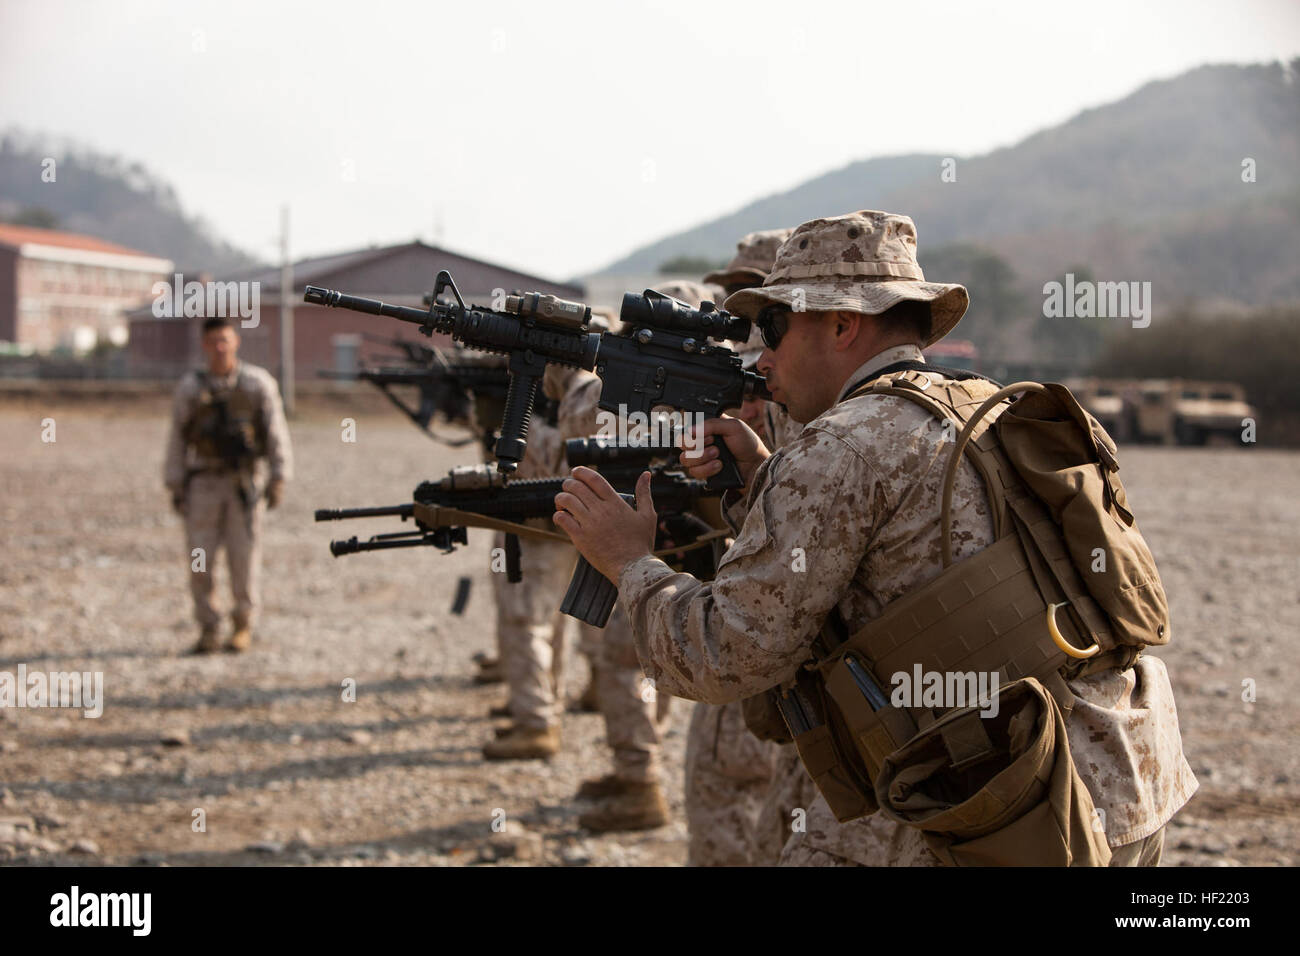 U.S. Marines with Apache Company, 3rd Light Armored Reconnaissance Battalion, 1st Marine Division participate in a combat marksmanship course March 27, 2014, at Suesongri Range in Pohang, South Korea, during exercise Ssang Yong 2014. Ssang Yong is a combined U.S.-South Korean combat readiness and joint/combined interoperability exercise designed to advance South Korean command and control capabilities through amphibious operations. (DoD photo by Lance Cpl. Andrew M. Blanco, U.S. Marine Corps/Released) 140327-M-MO123-001 (13464841804) Stock Photo